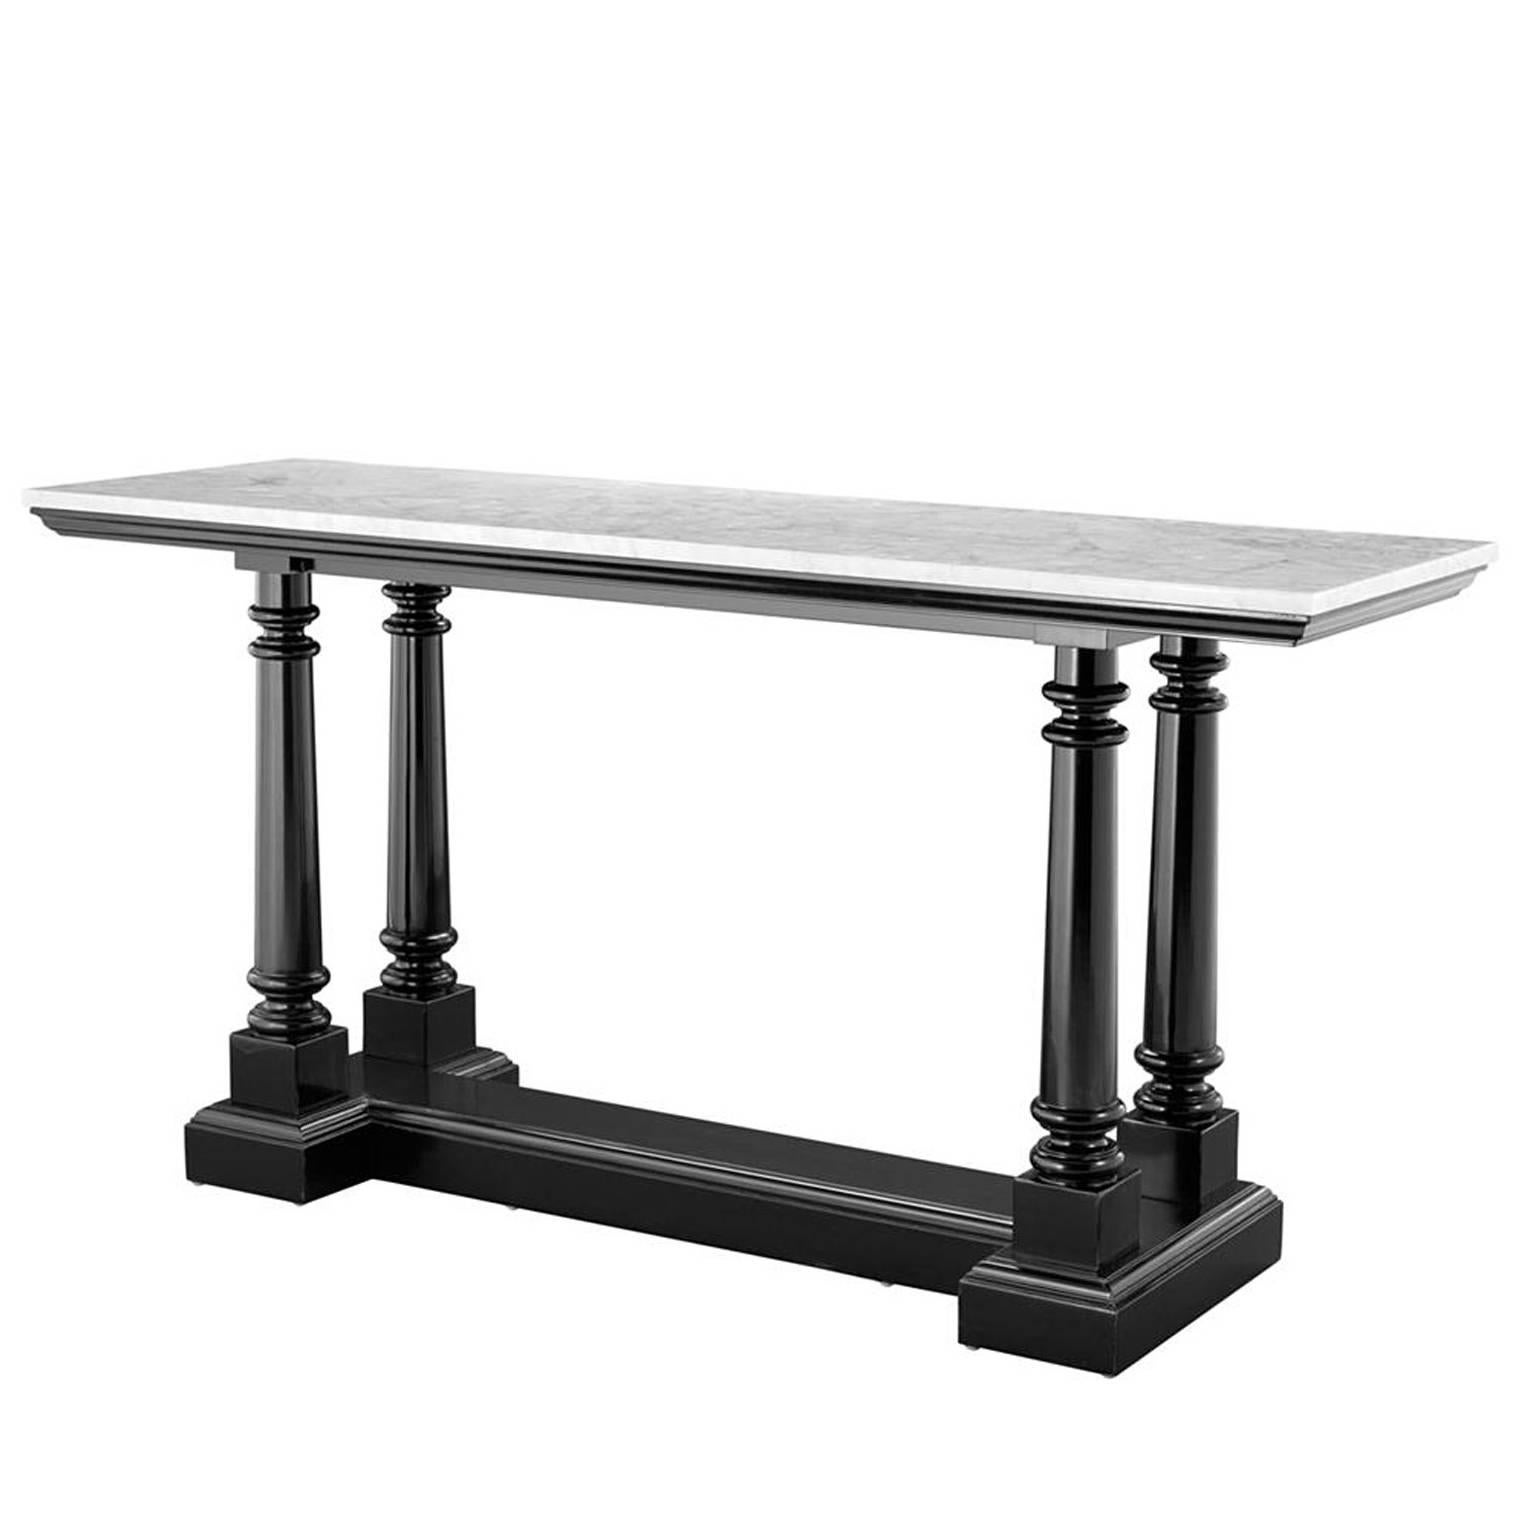 Herbston Console in Lacquered Mahogany Wood and White Marble Top